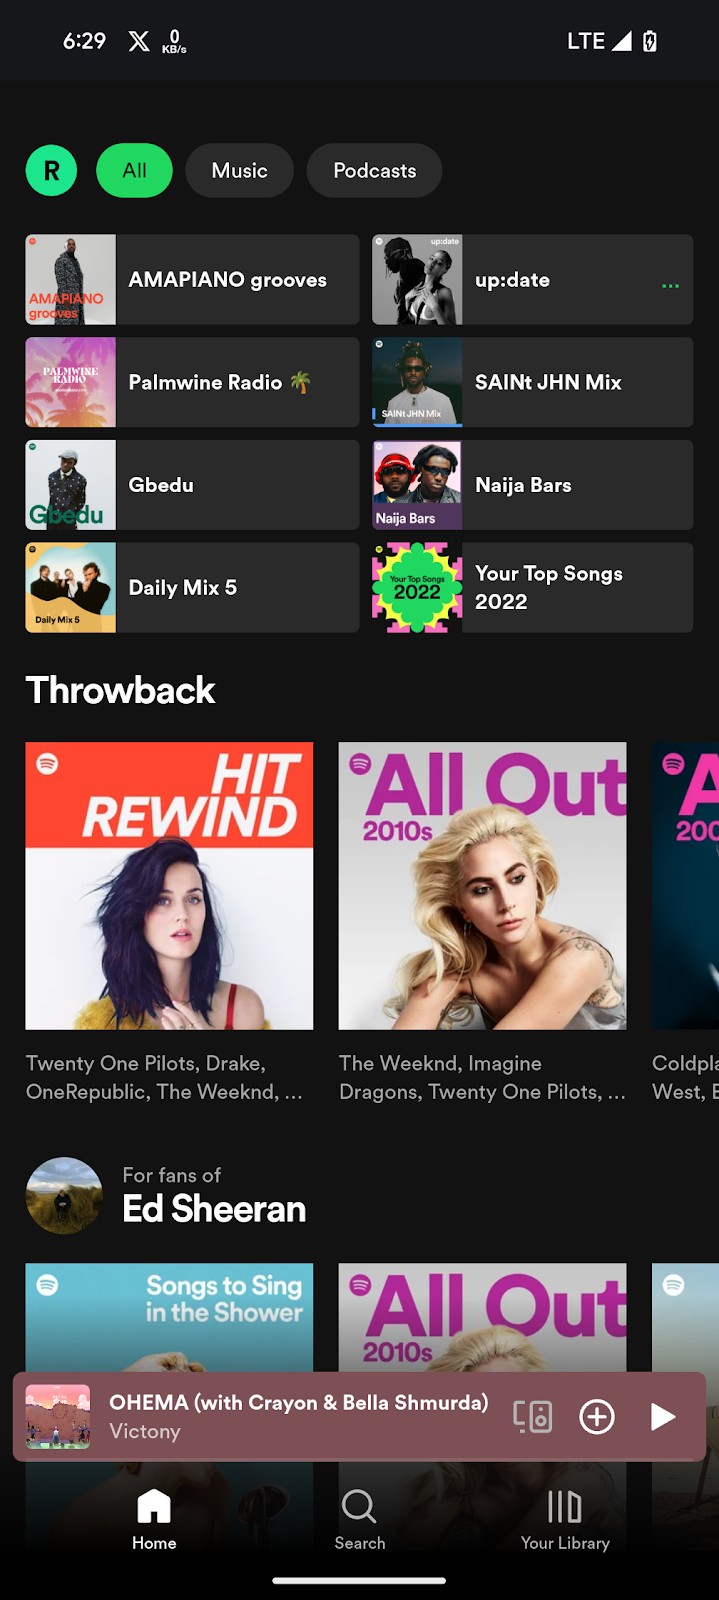 Spotify home page